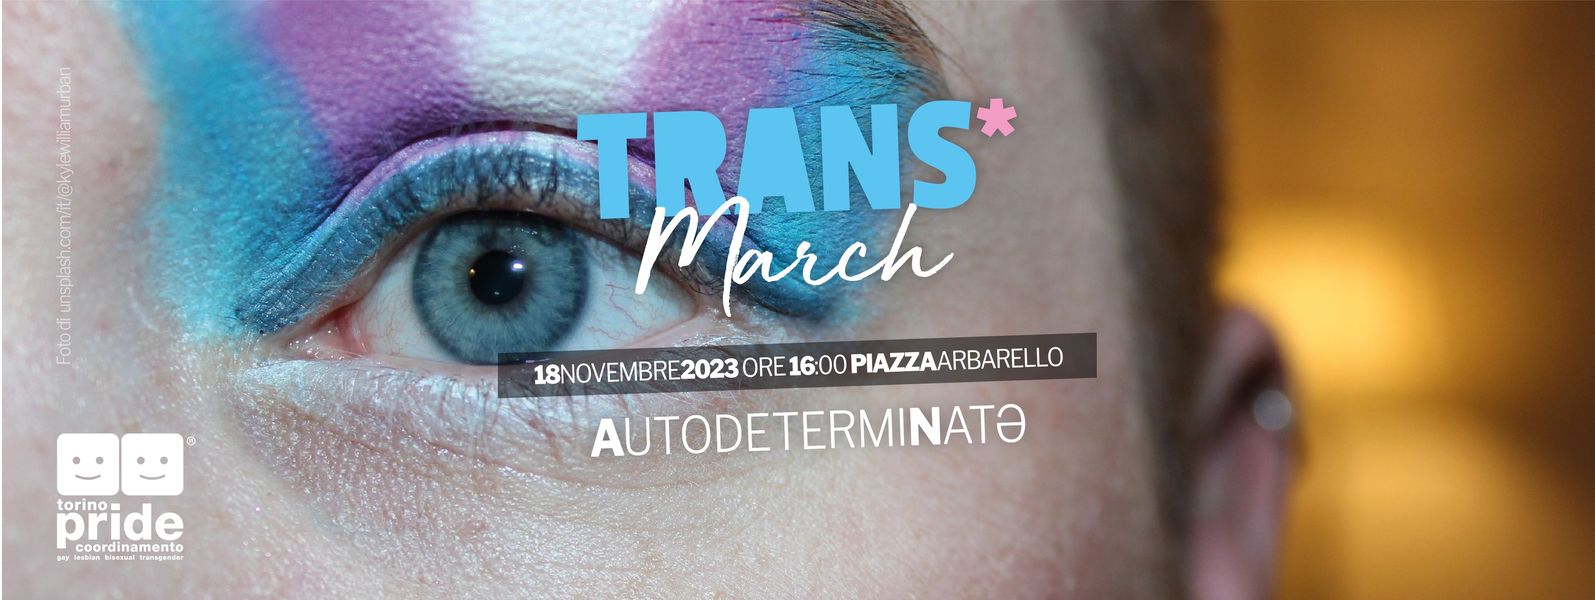 Trans March